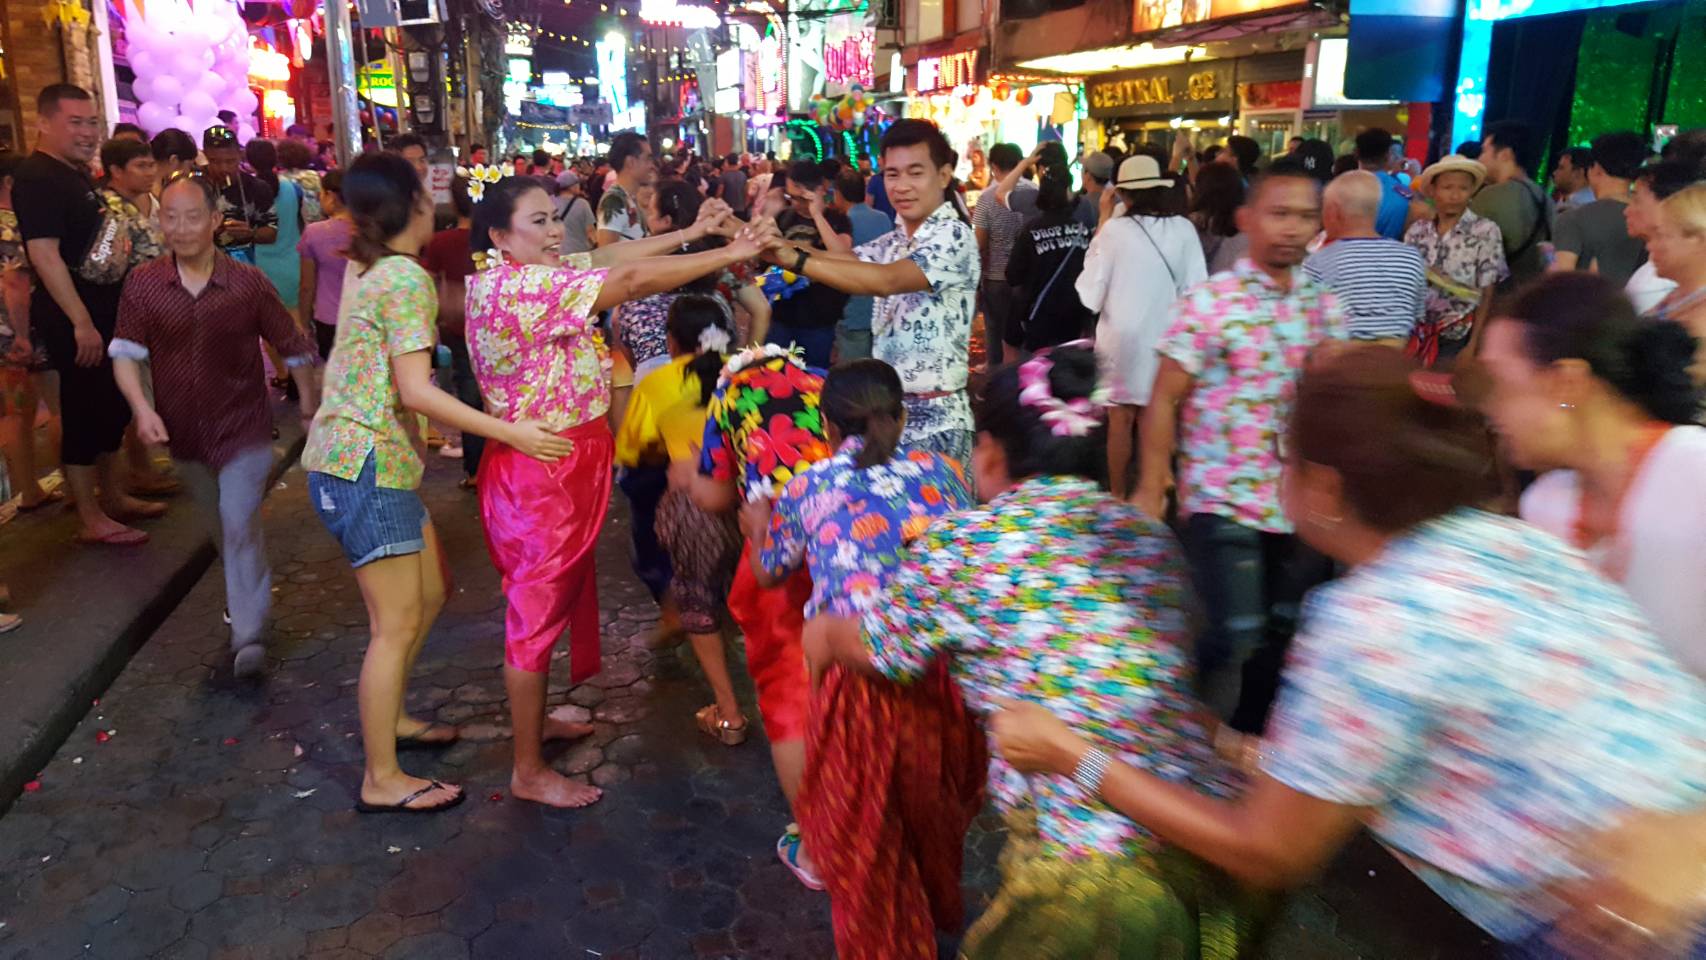 The Pattaya Women’s Development Club showed off traditional Thai fashion and games during the Songkran Festival on Walking Street. Shown here, they play Rere Khaosan, a Thai version of London Bridges.